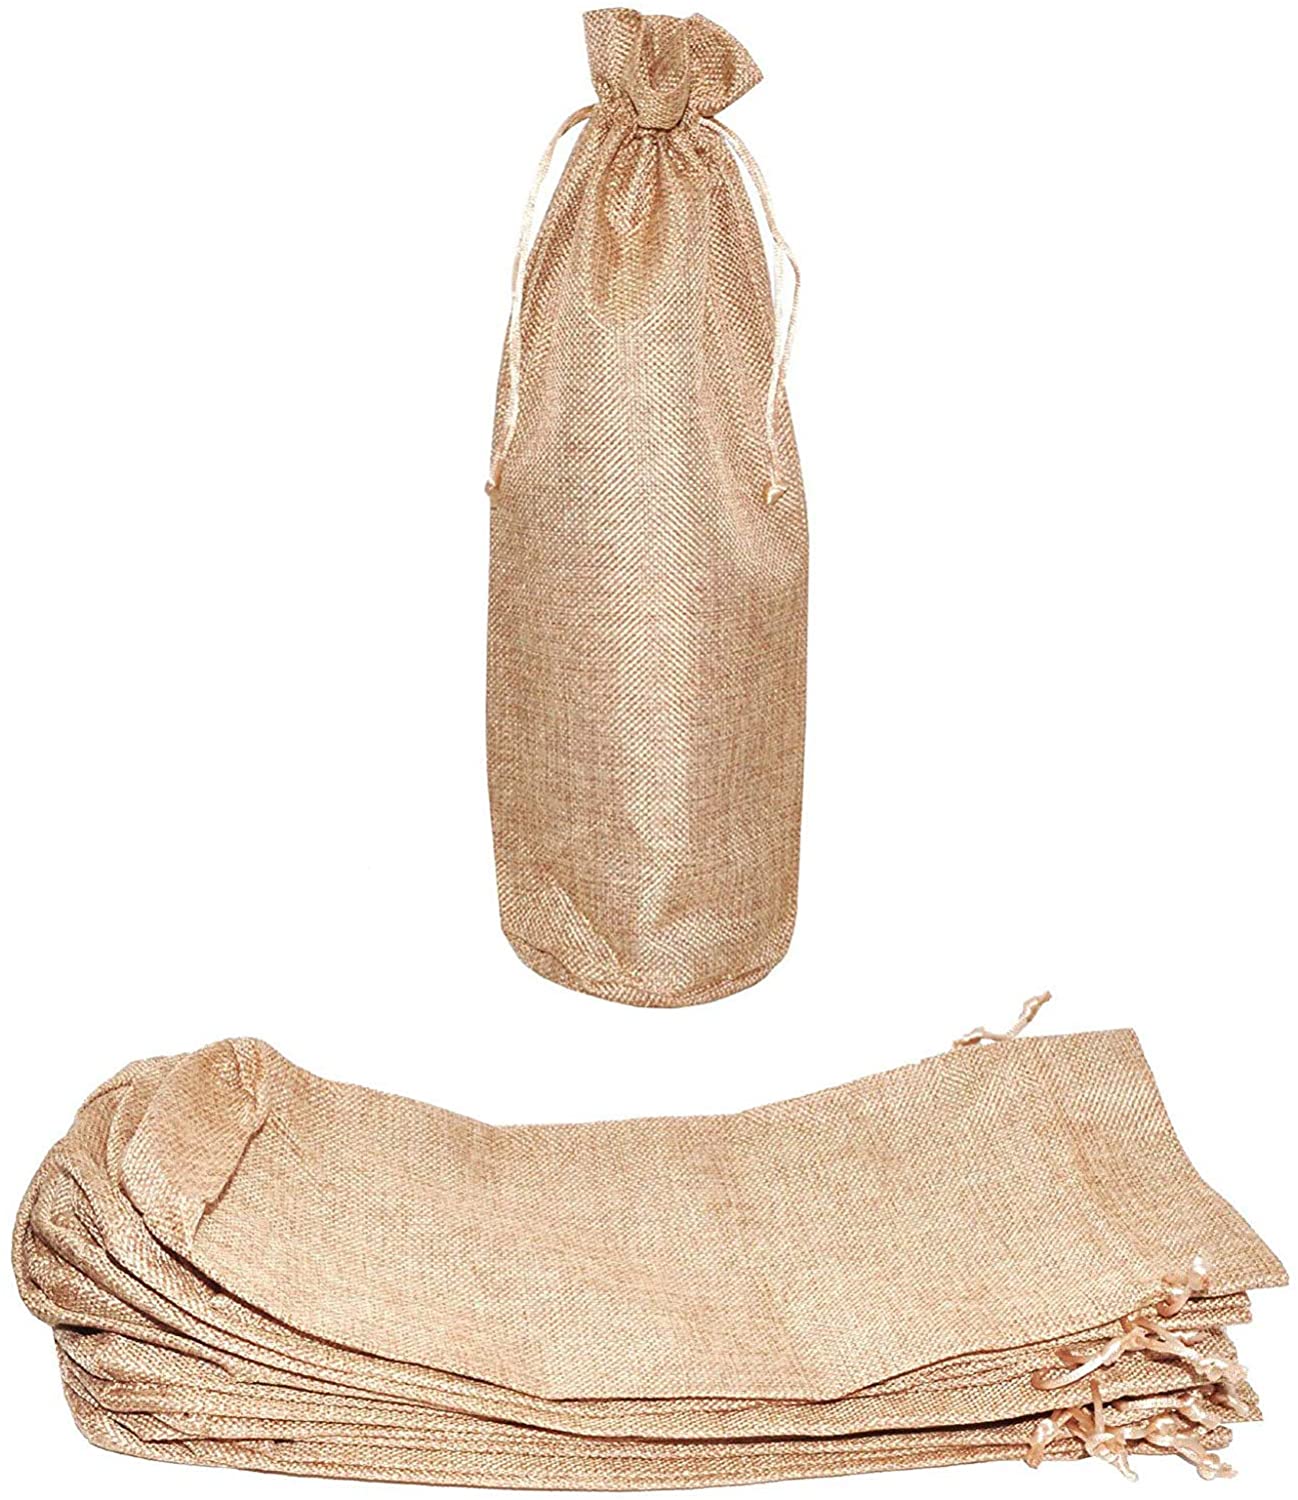 Mandala Crafts Burlap Wine Bags for Wine Bottles Gifts – Reusable Cloth Wine Gift Bags Bulk Pack - Drawstring Gift Bag Bottle Covers for Party Wedding Holiday 12 PCs